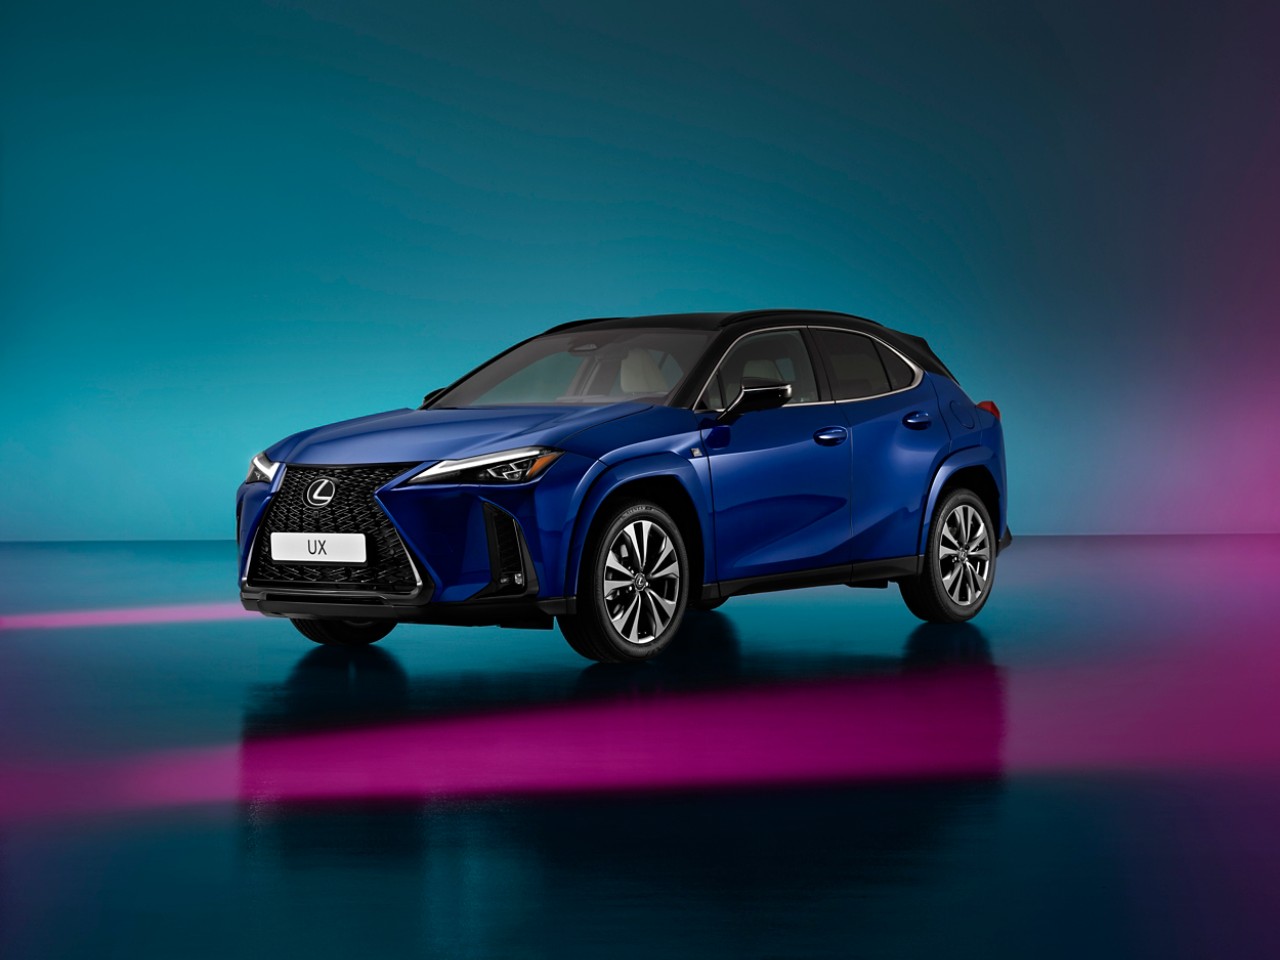 Side profile of the Lexus UX